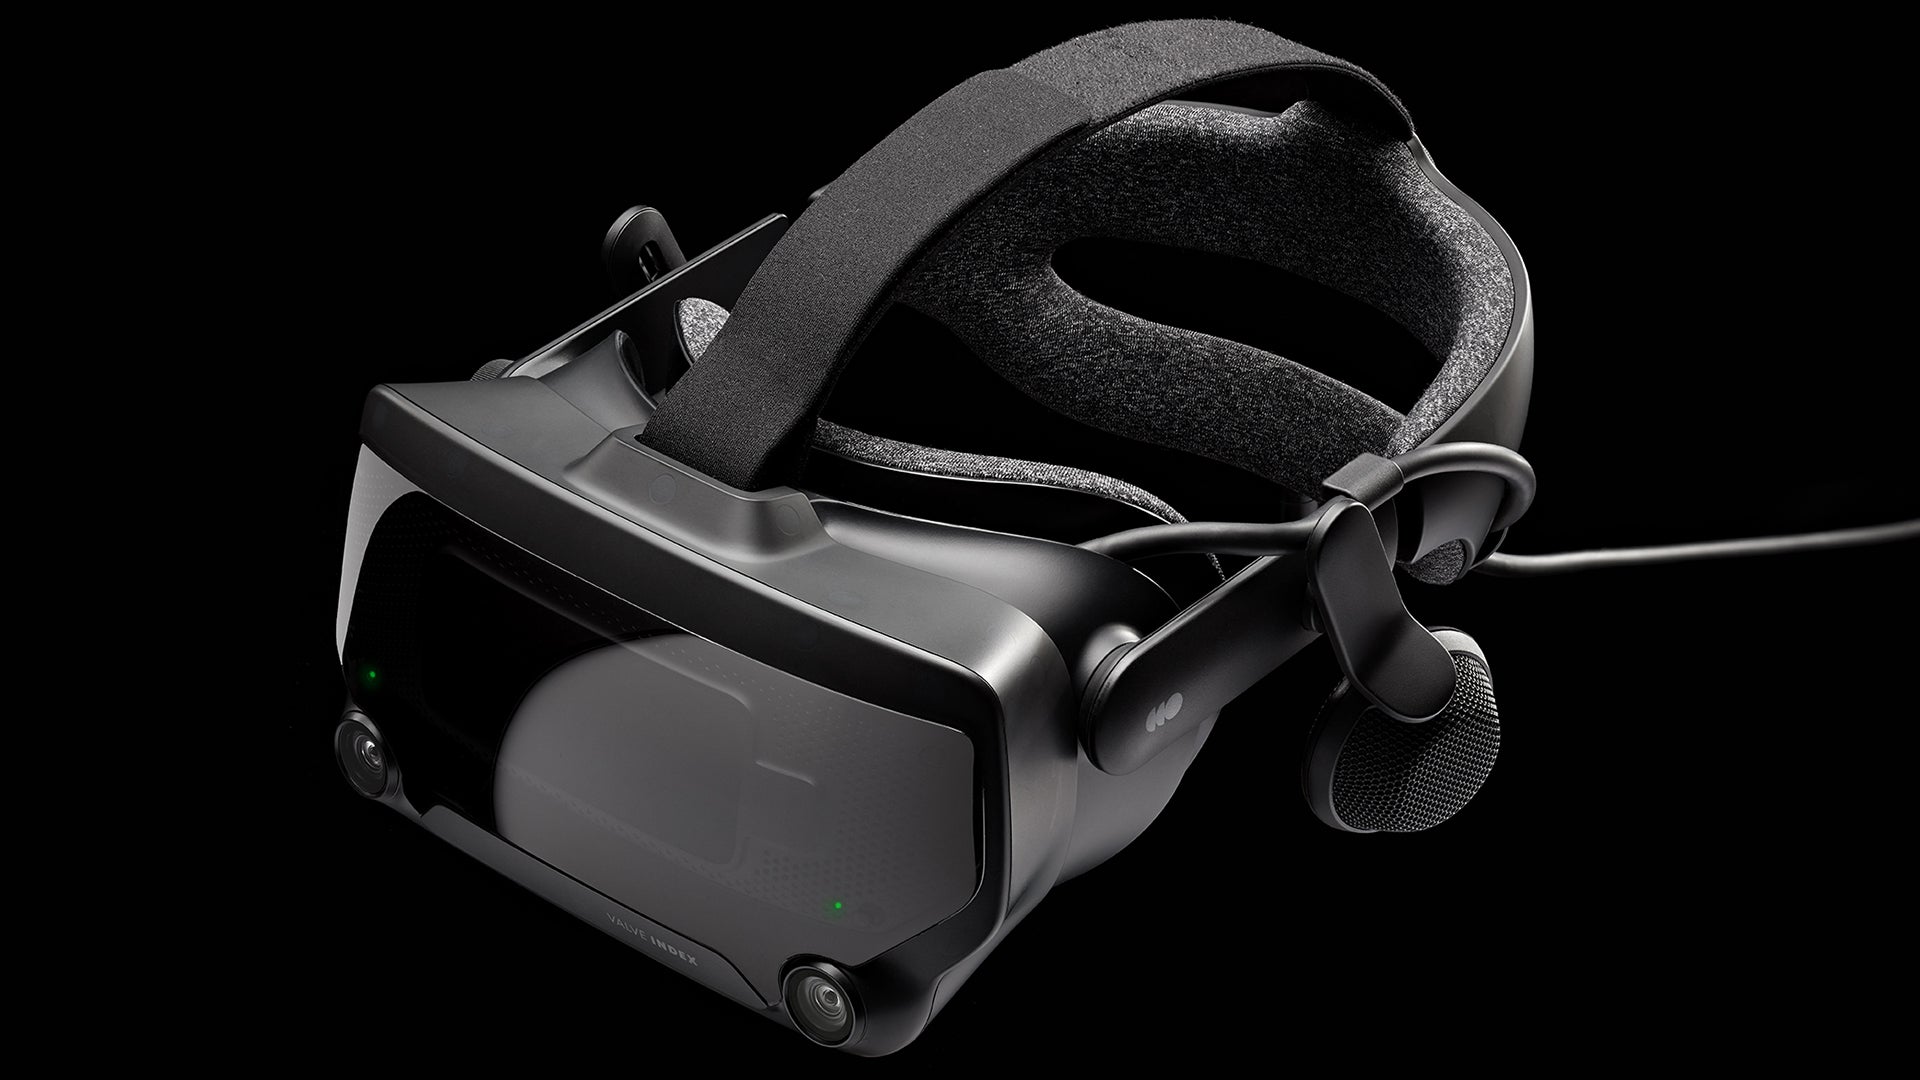 Valve Index Is Luxurious, But A Hassle